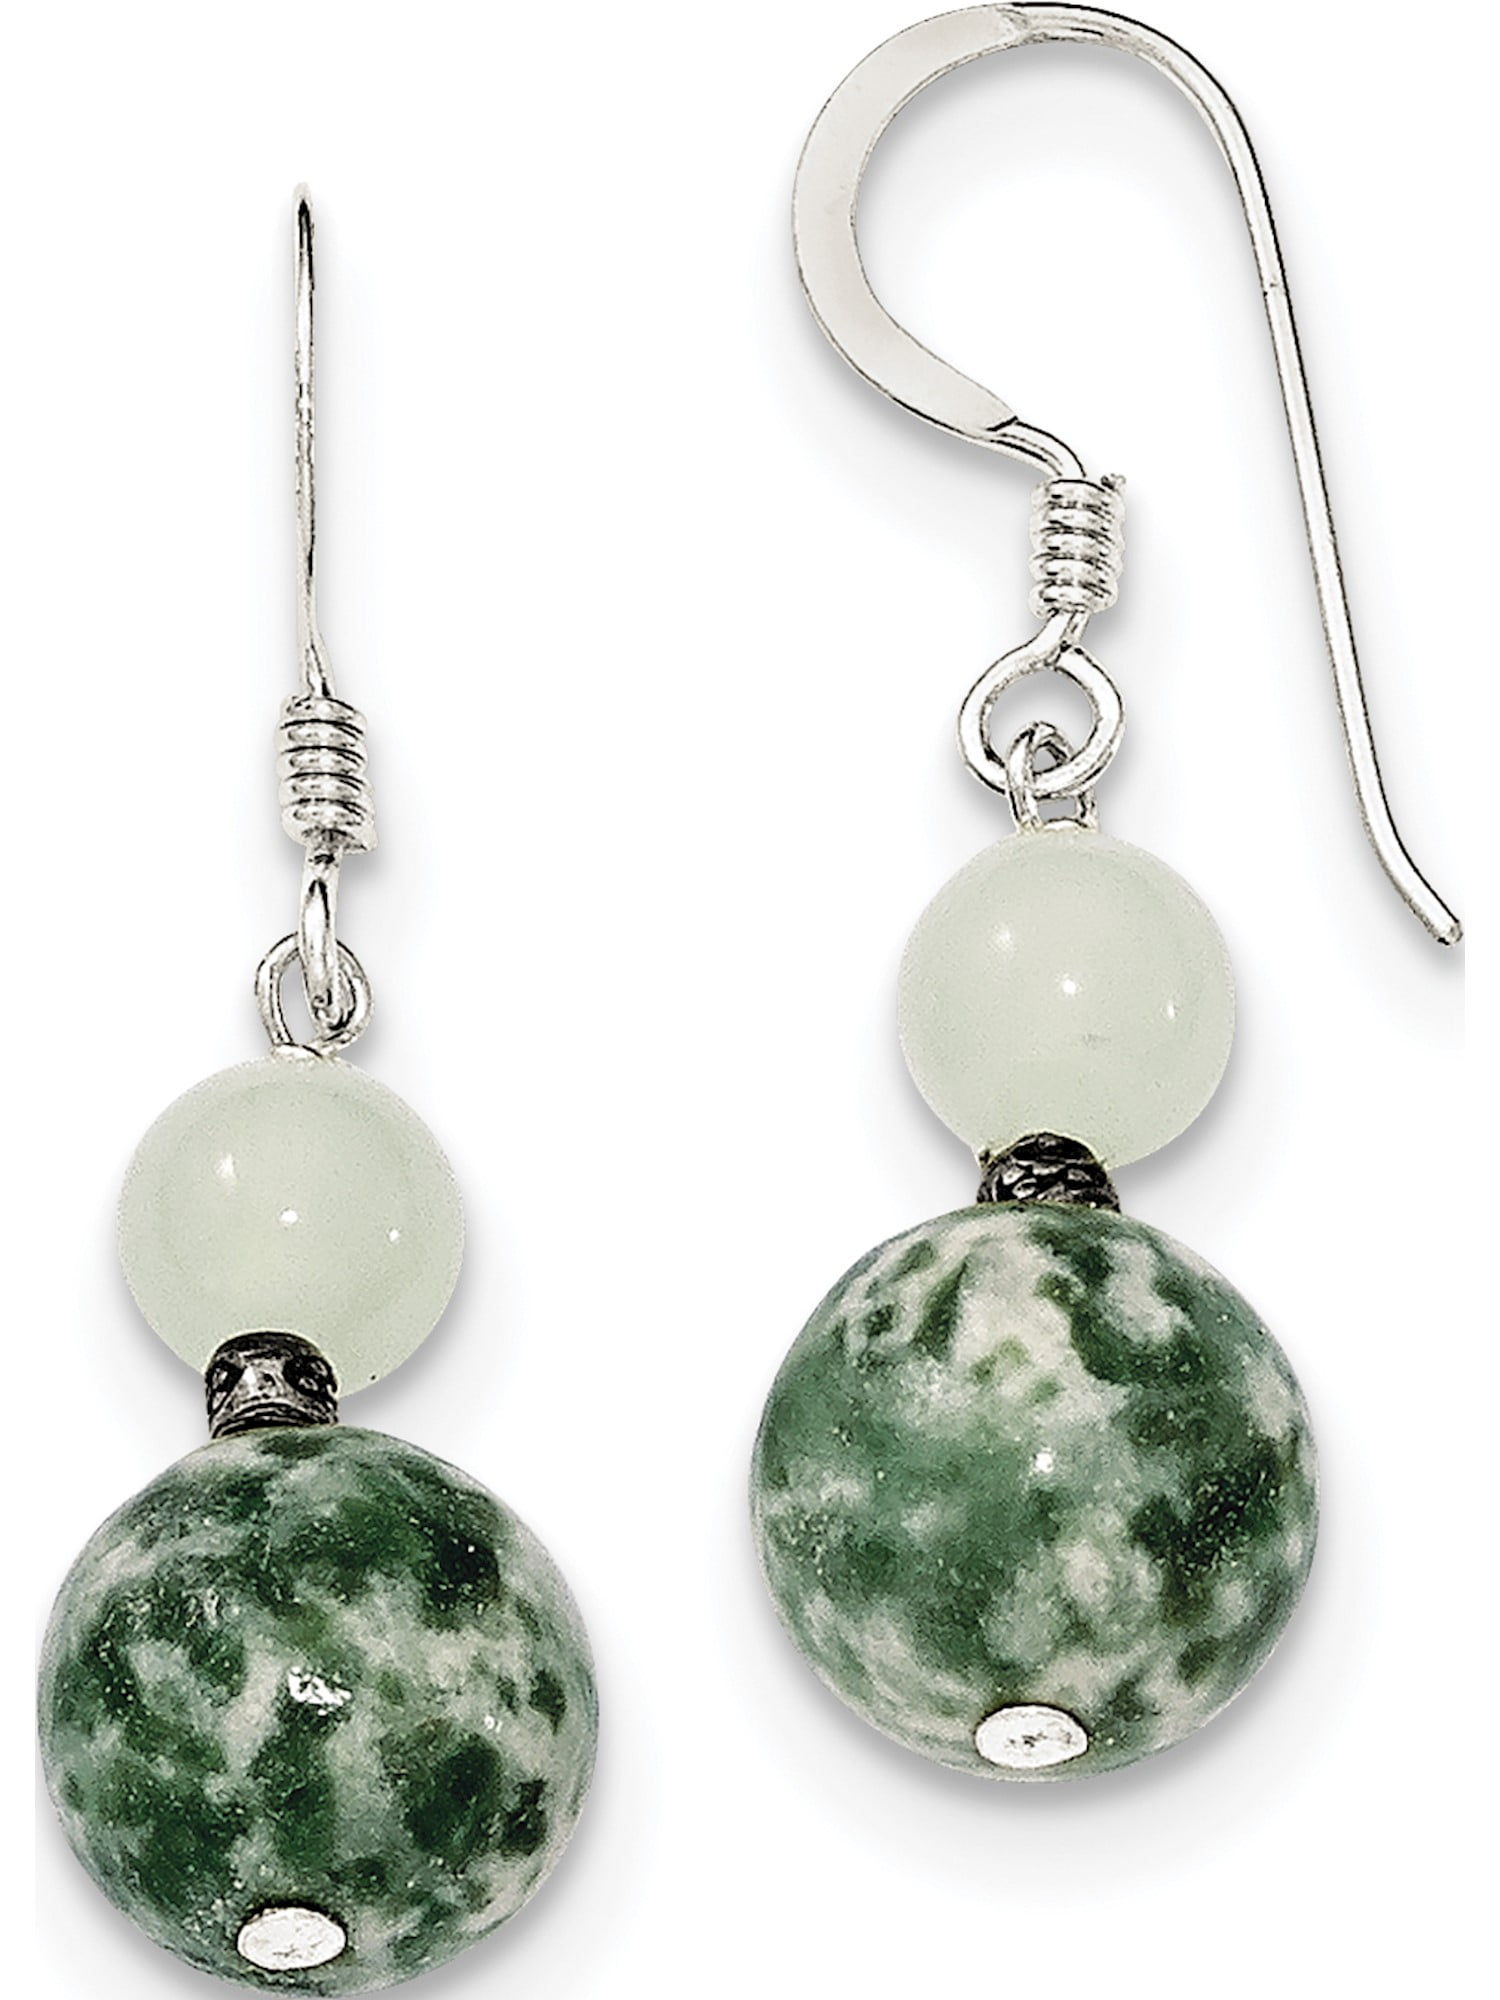 Moss Agate Sterling Silver Stud Earrings with Green Oval Gemstones